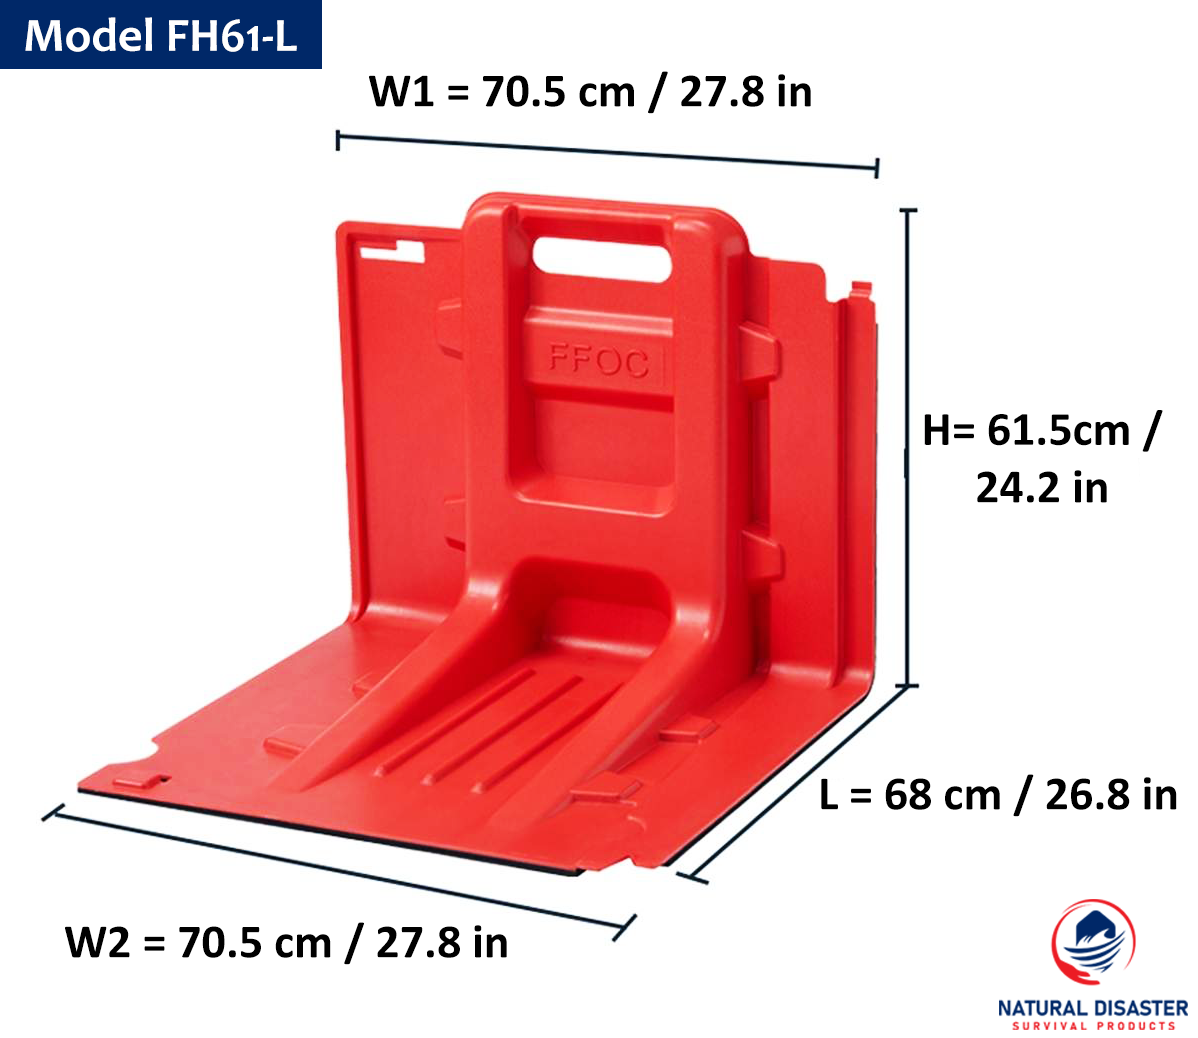 Flood Barriers Model FH61-L